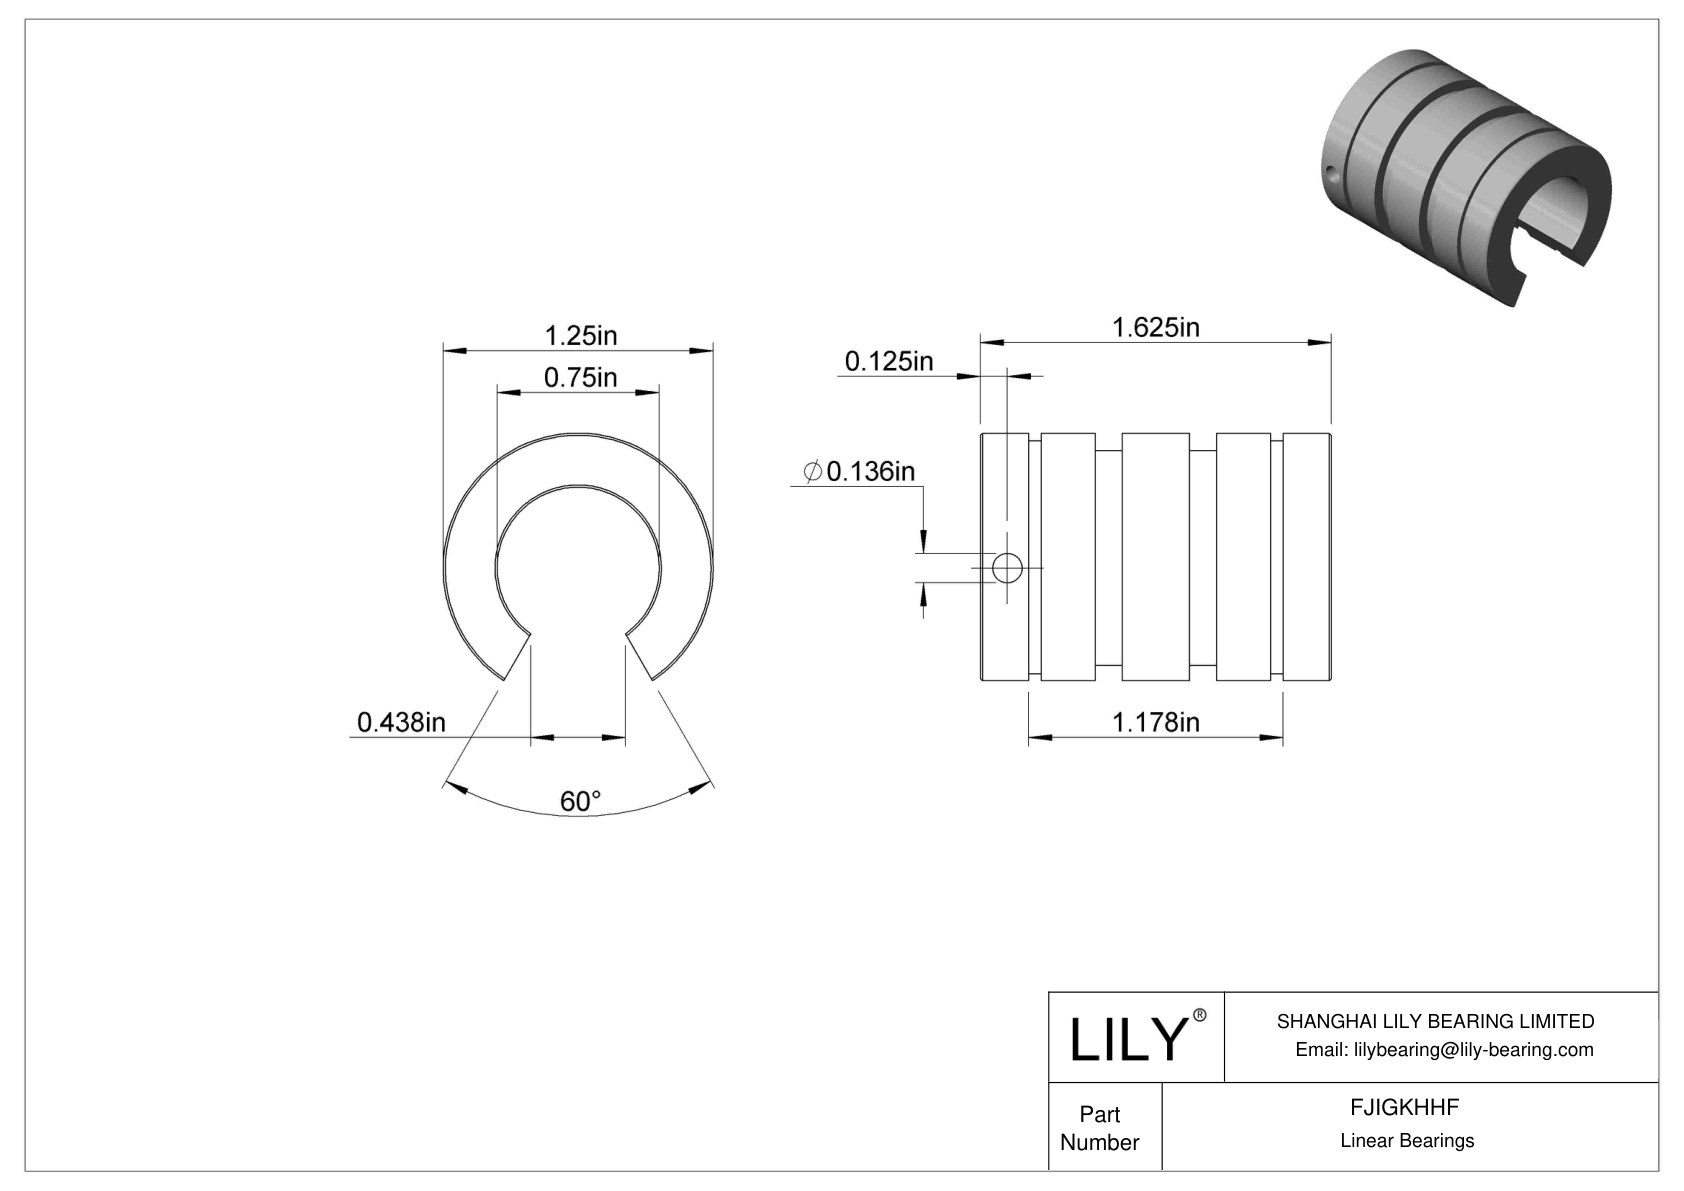 FJIGKHHF Common Linear Sleeve Bearings for Support Rail Shafts cad drawing